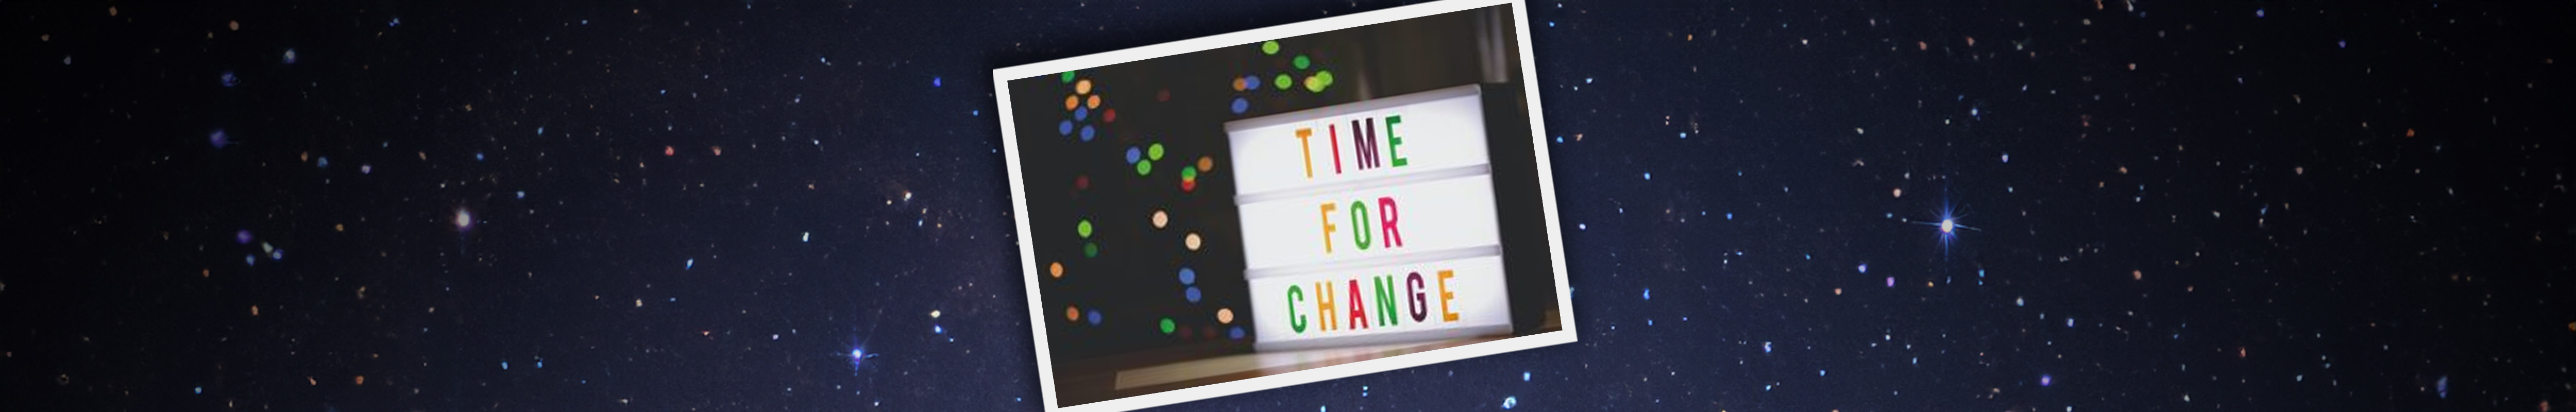 time for change feature 1920x500